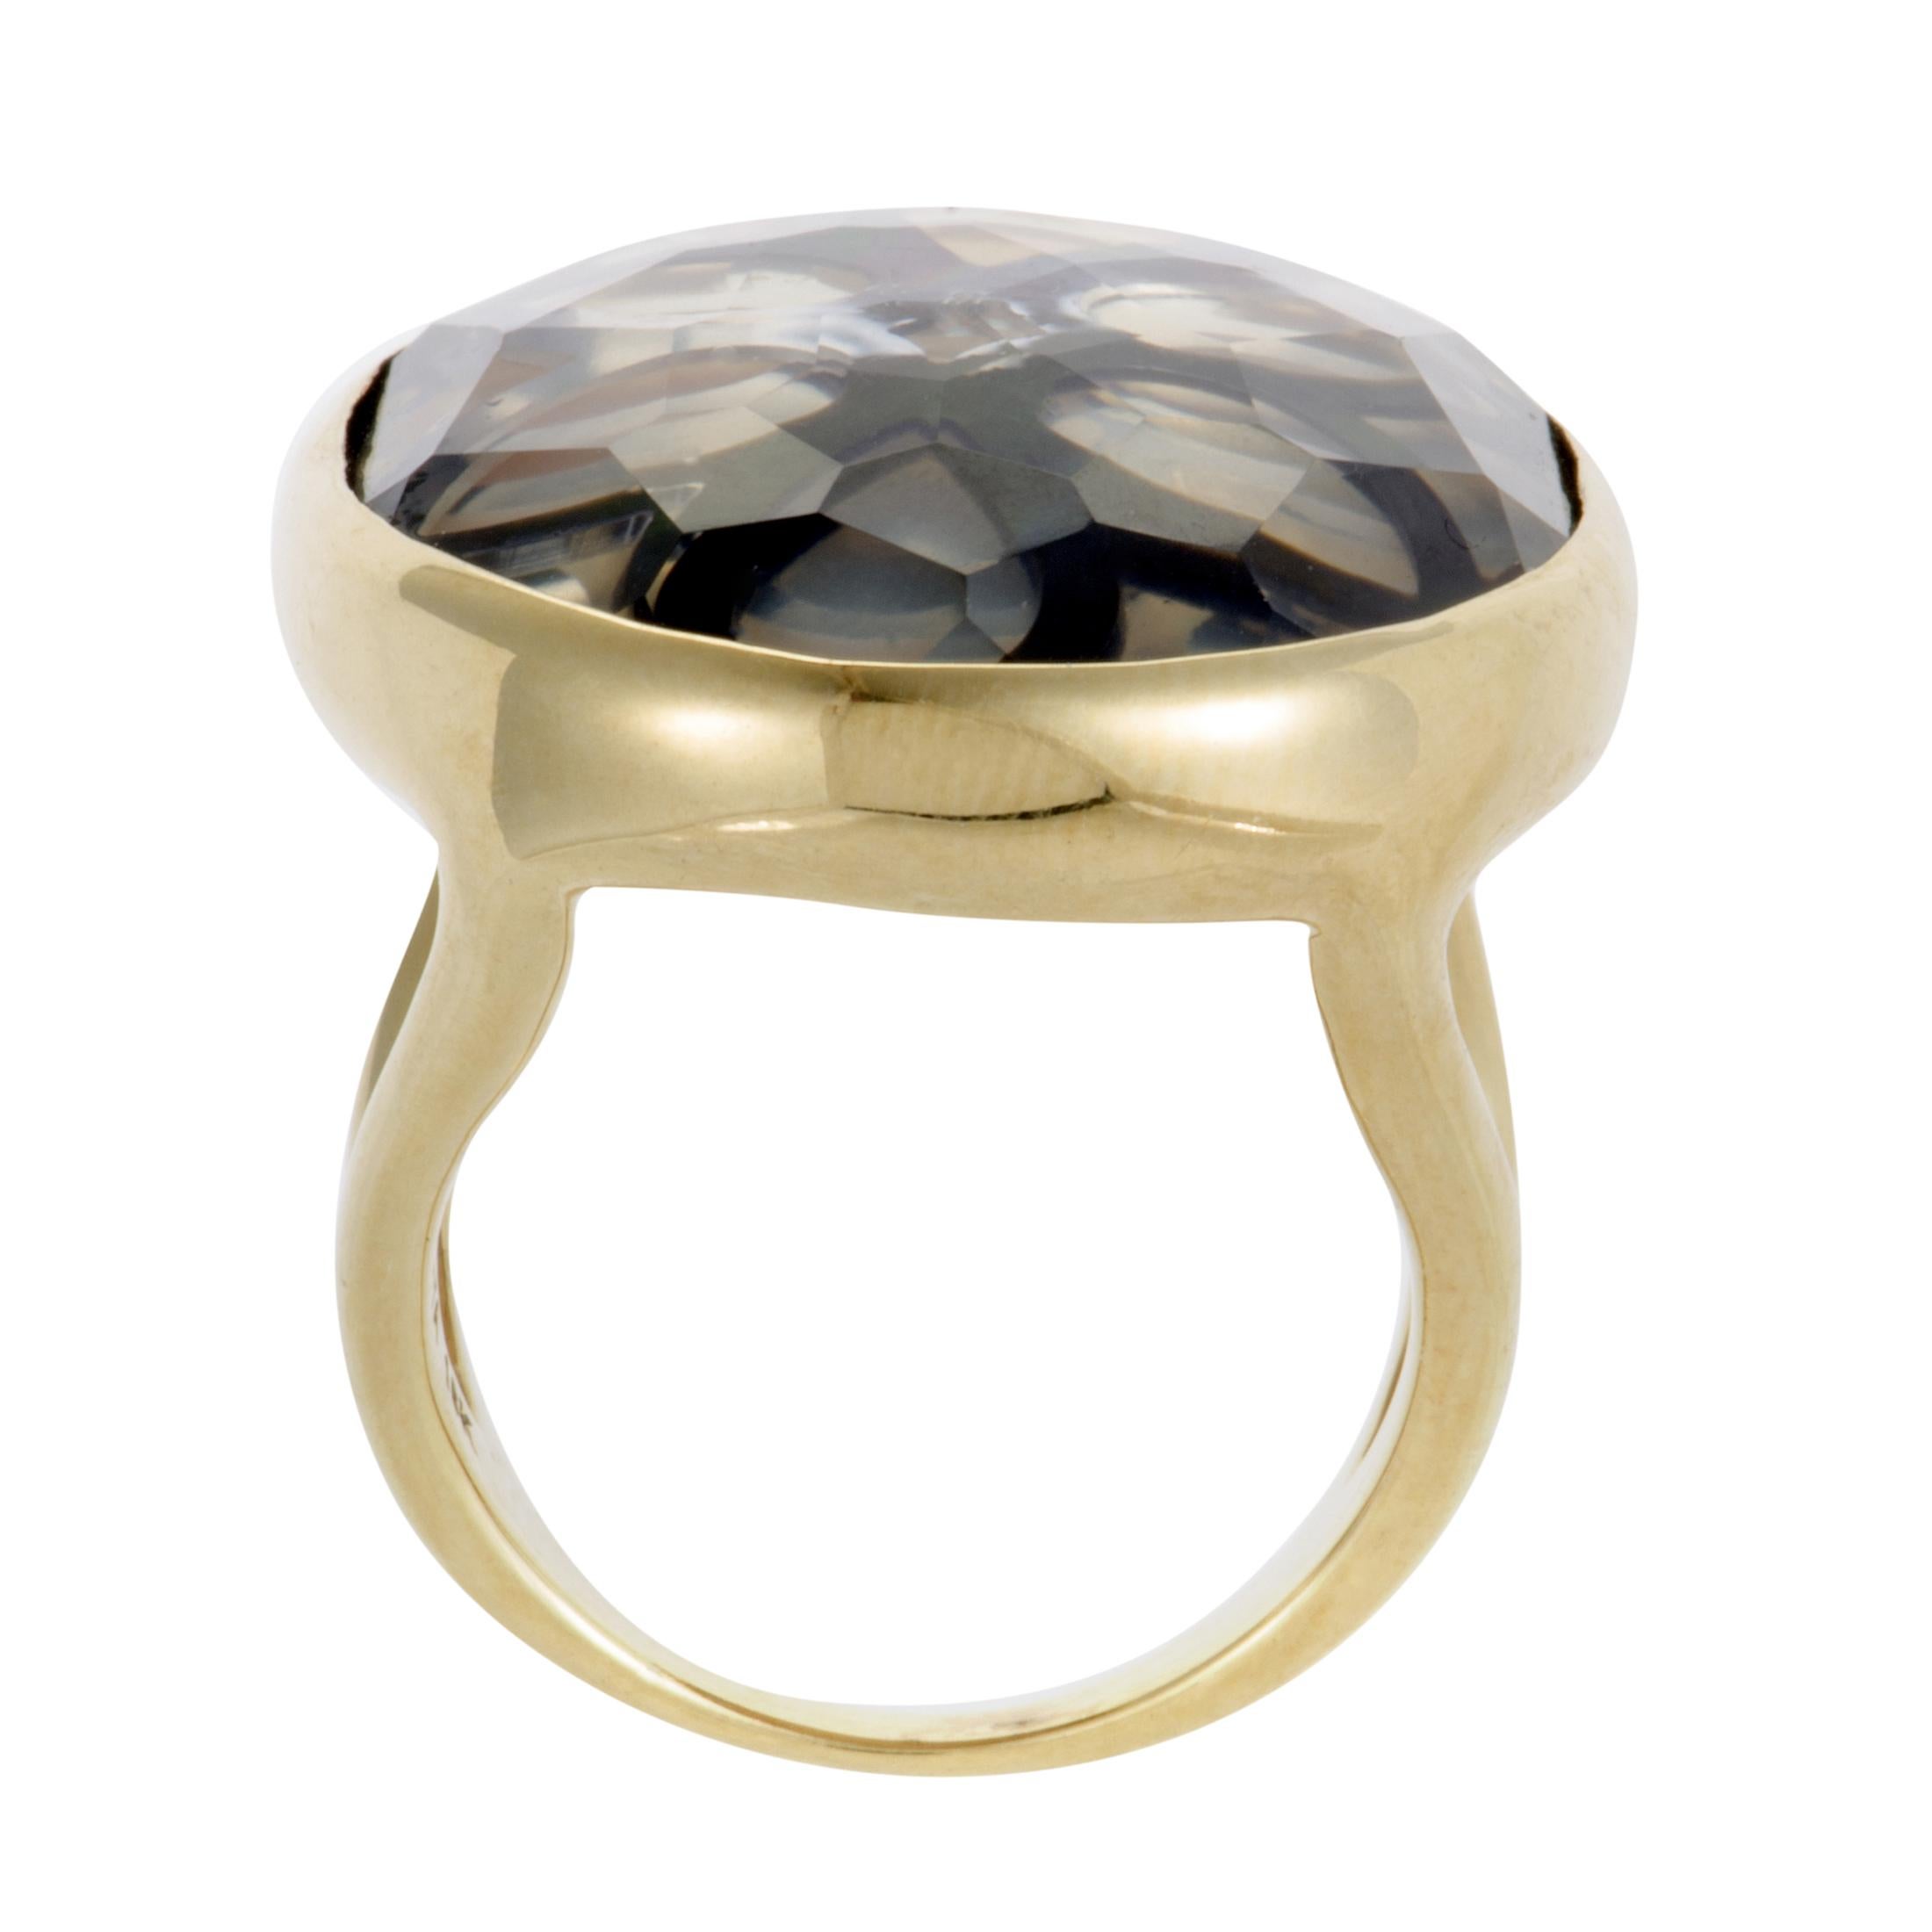 The sublime combination of splendid mother of pearl and clear quartz complemented by elegant 18K yellow gold offers enchantingly classy appearance in this marvelous ring designed by Ippolita for the exquisitely fashionable “Rock Candy”